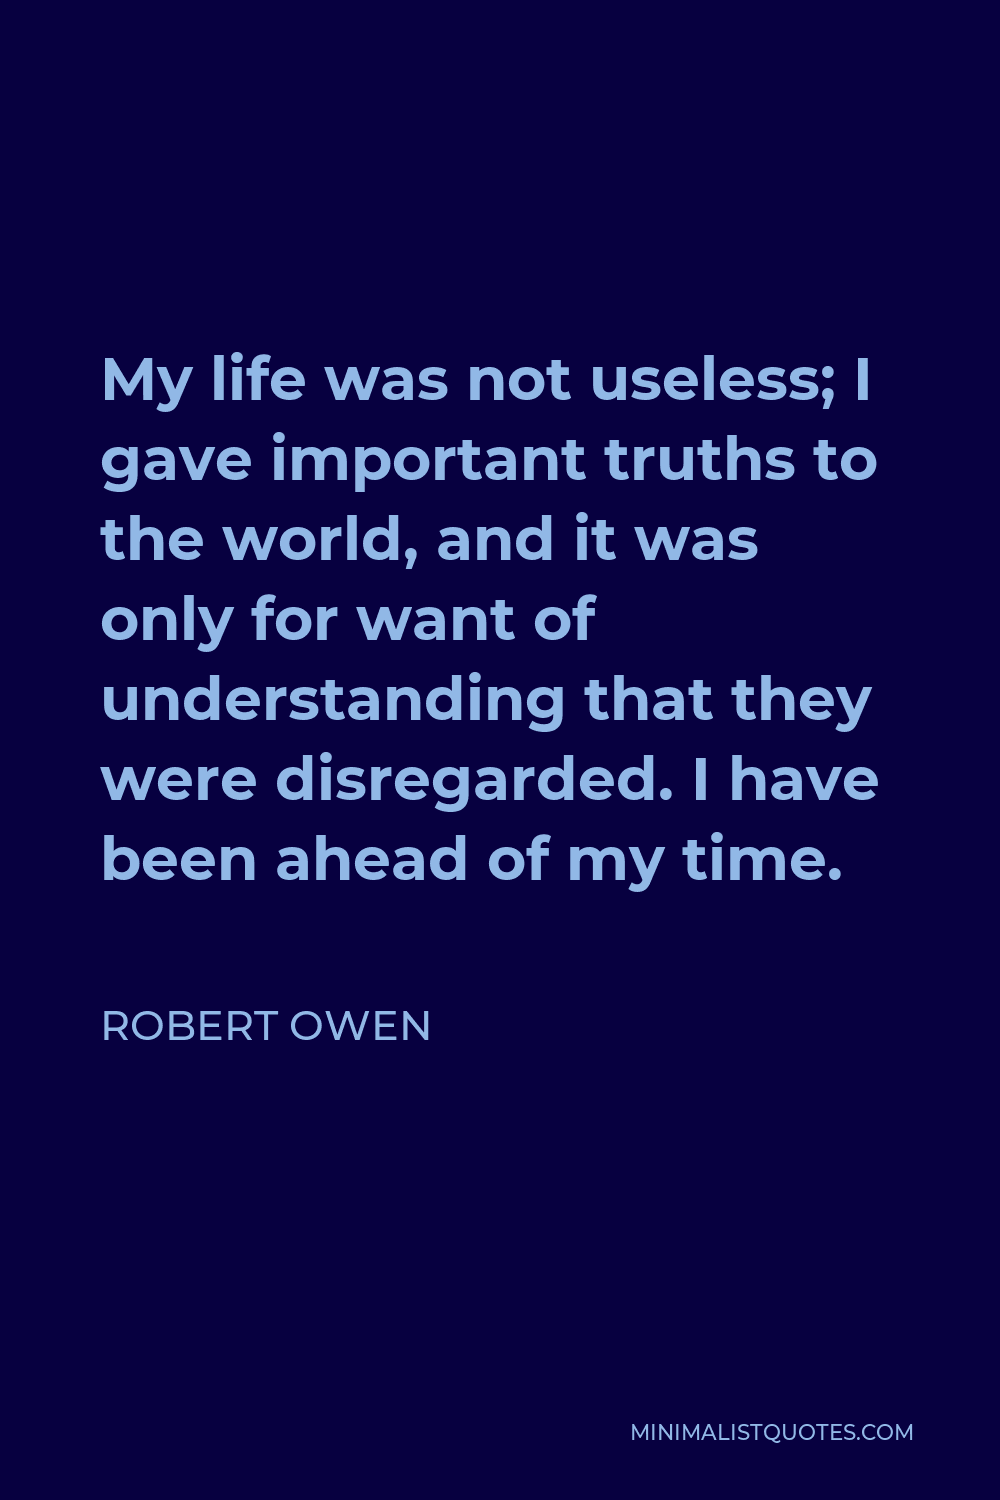 Robert Owen Quote - My life was not useless; I gave important truths to the world, and it was only for want of understanding that they were disregarded. I have been ahead of my time.